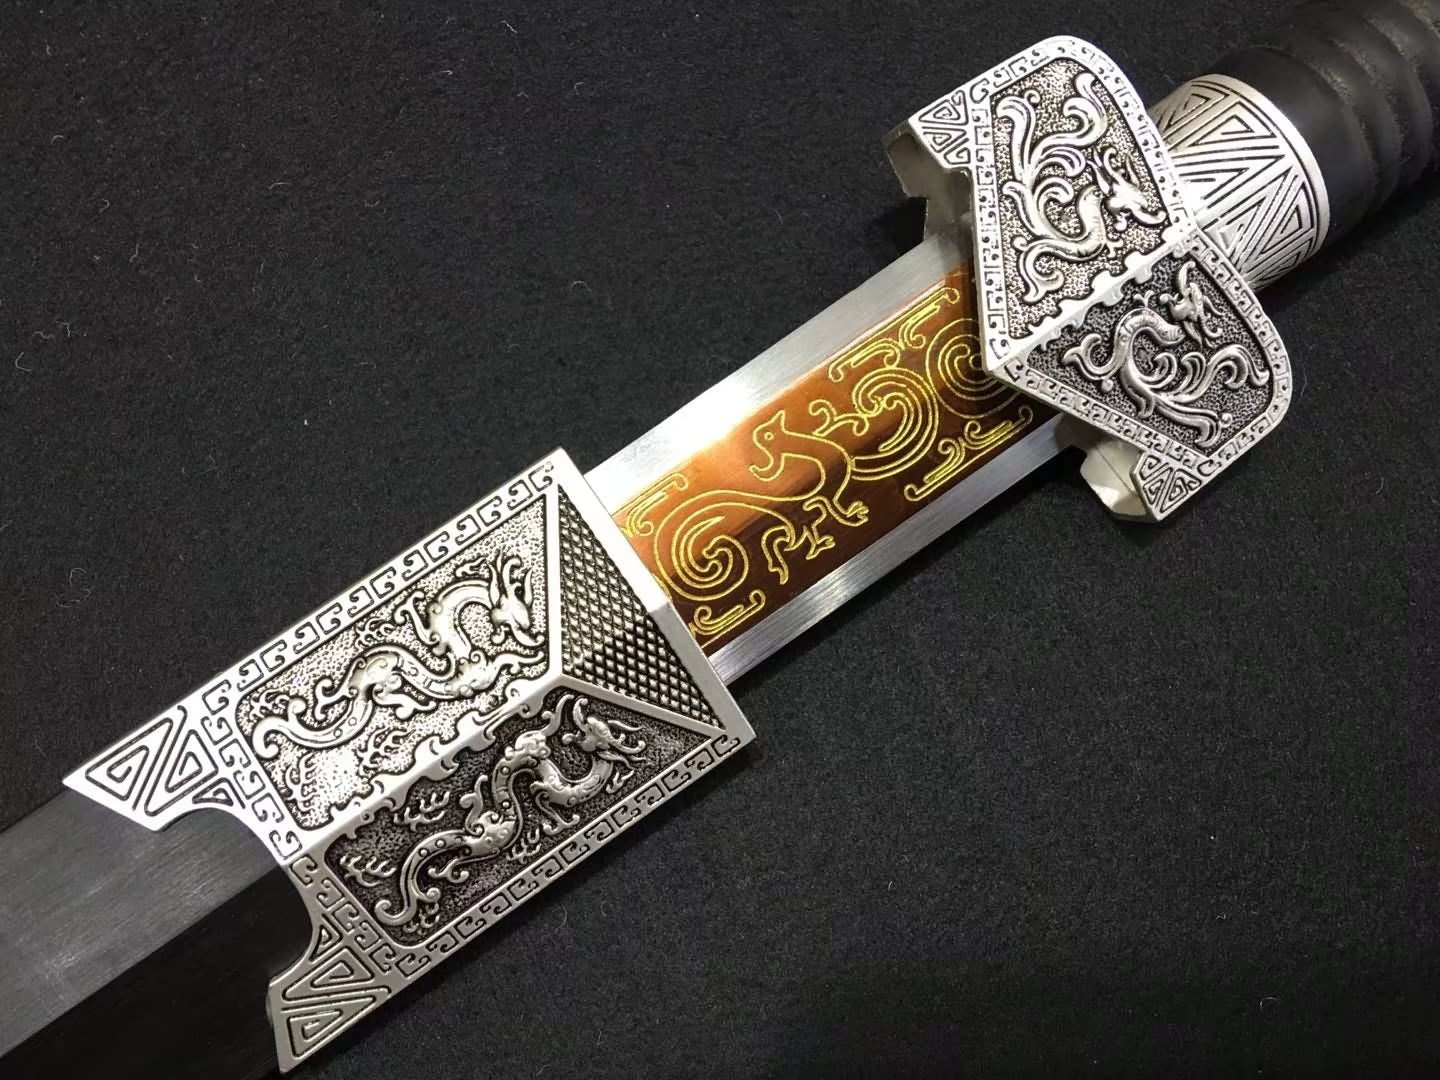 Warring states sword,High carbon steel blade,Black scabbard,Alloy fittings - Chinese sword shop